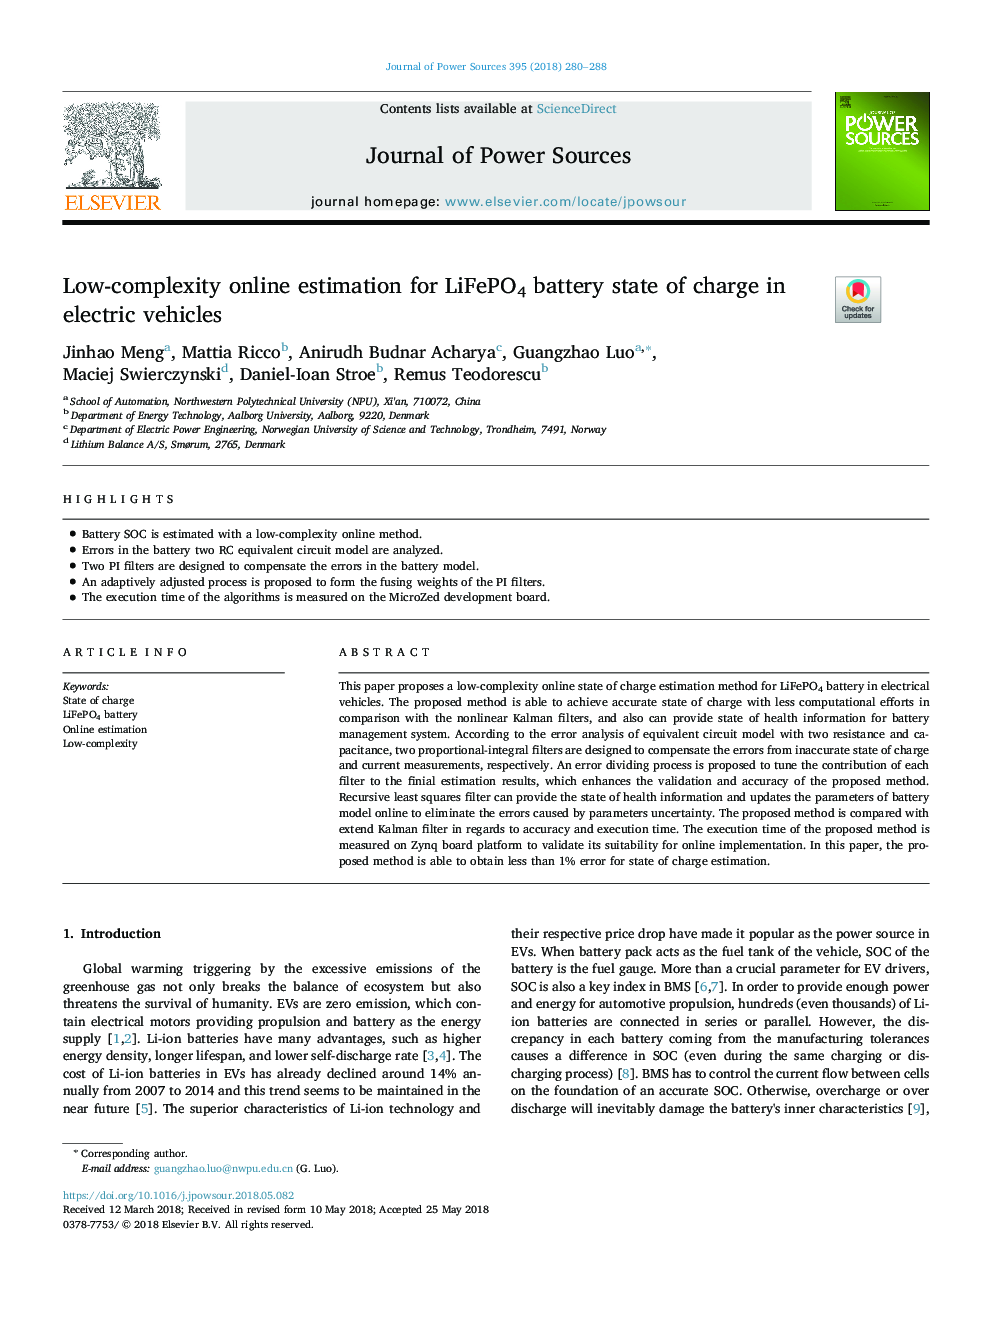 Low-complexity online estimation for LiFePO4 battery state of charge in electric vehicles